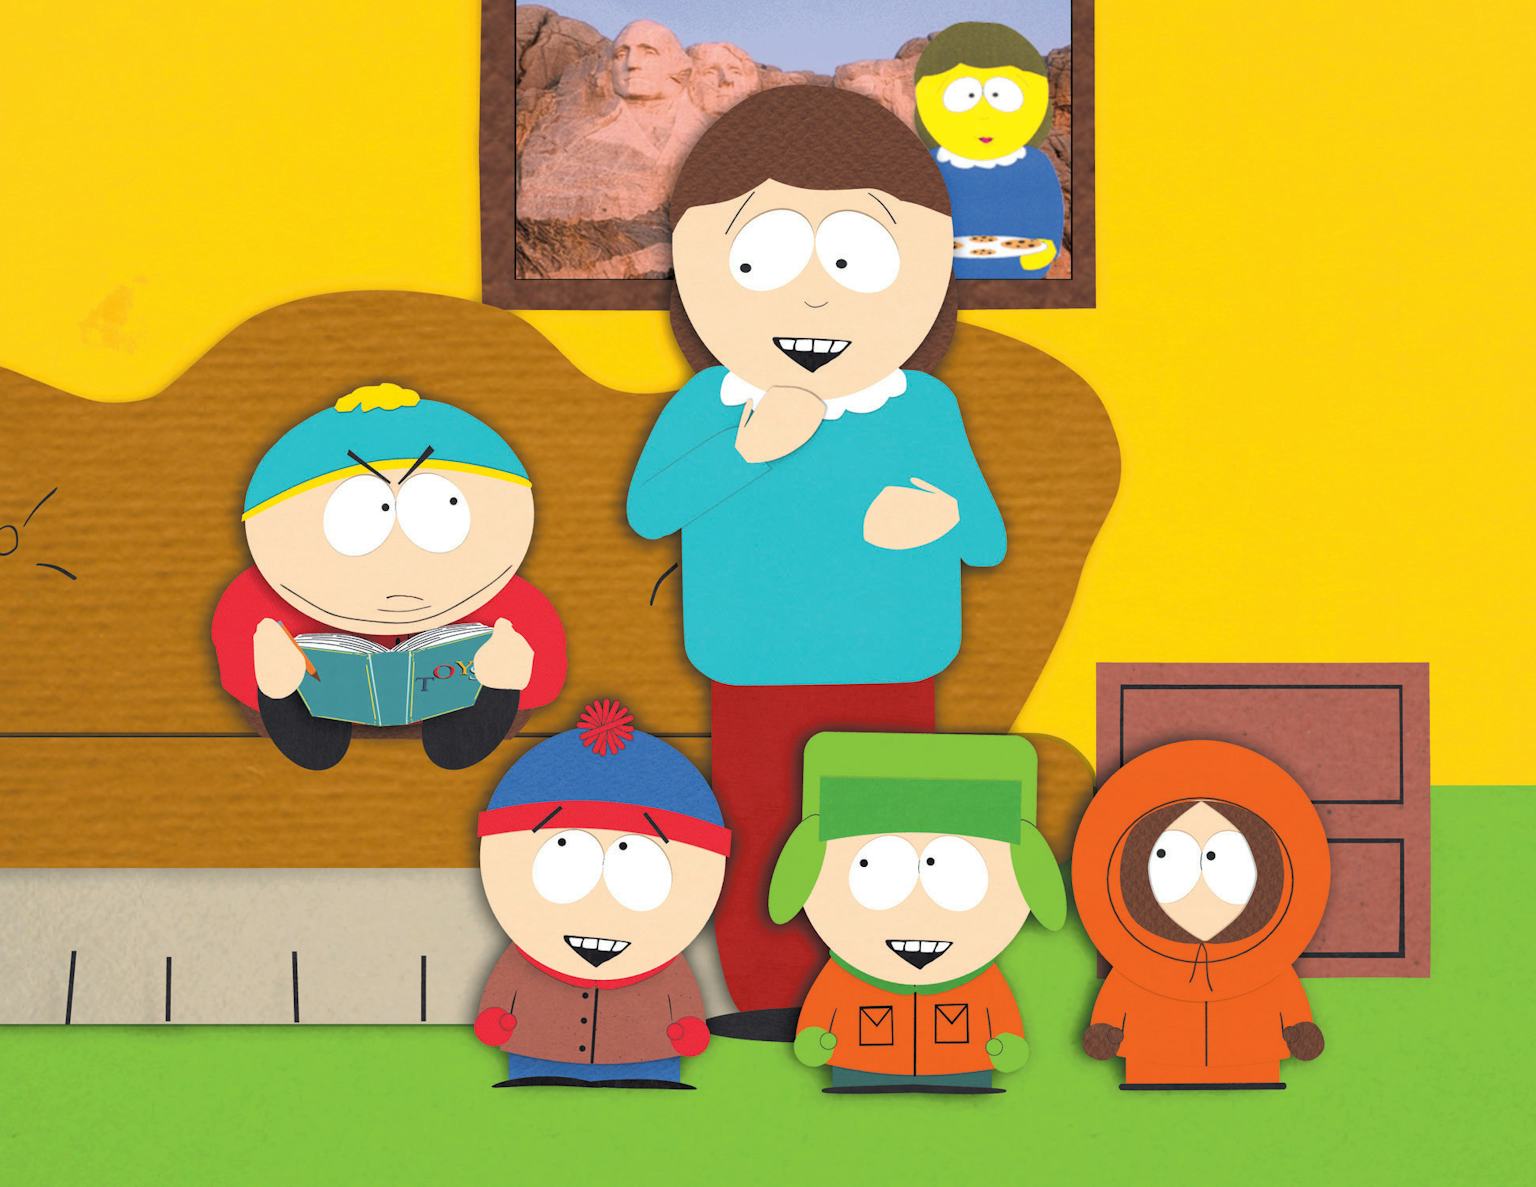 The Best 'South Park' Episode to ReWatch From Each Season